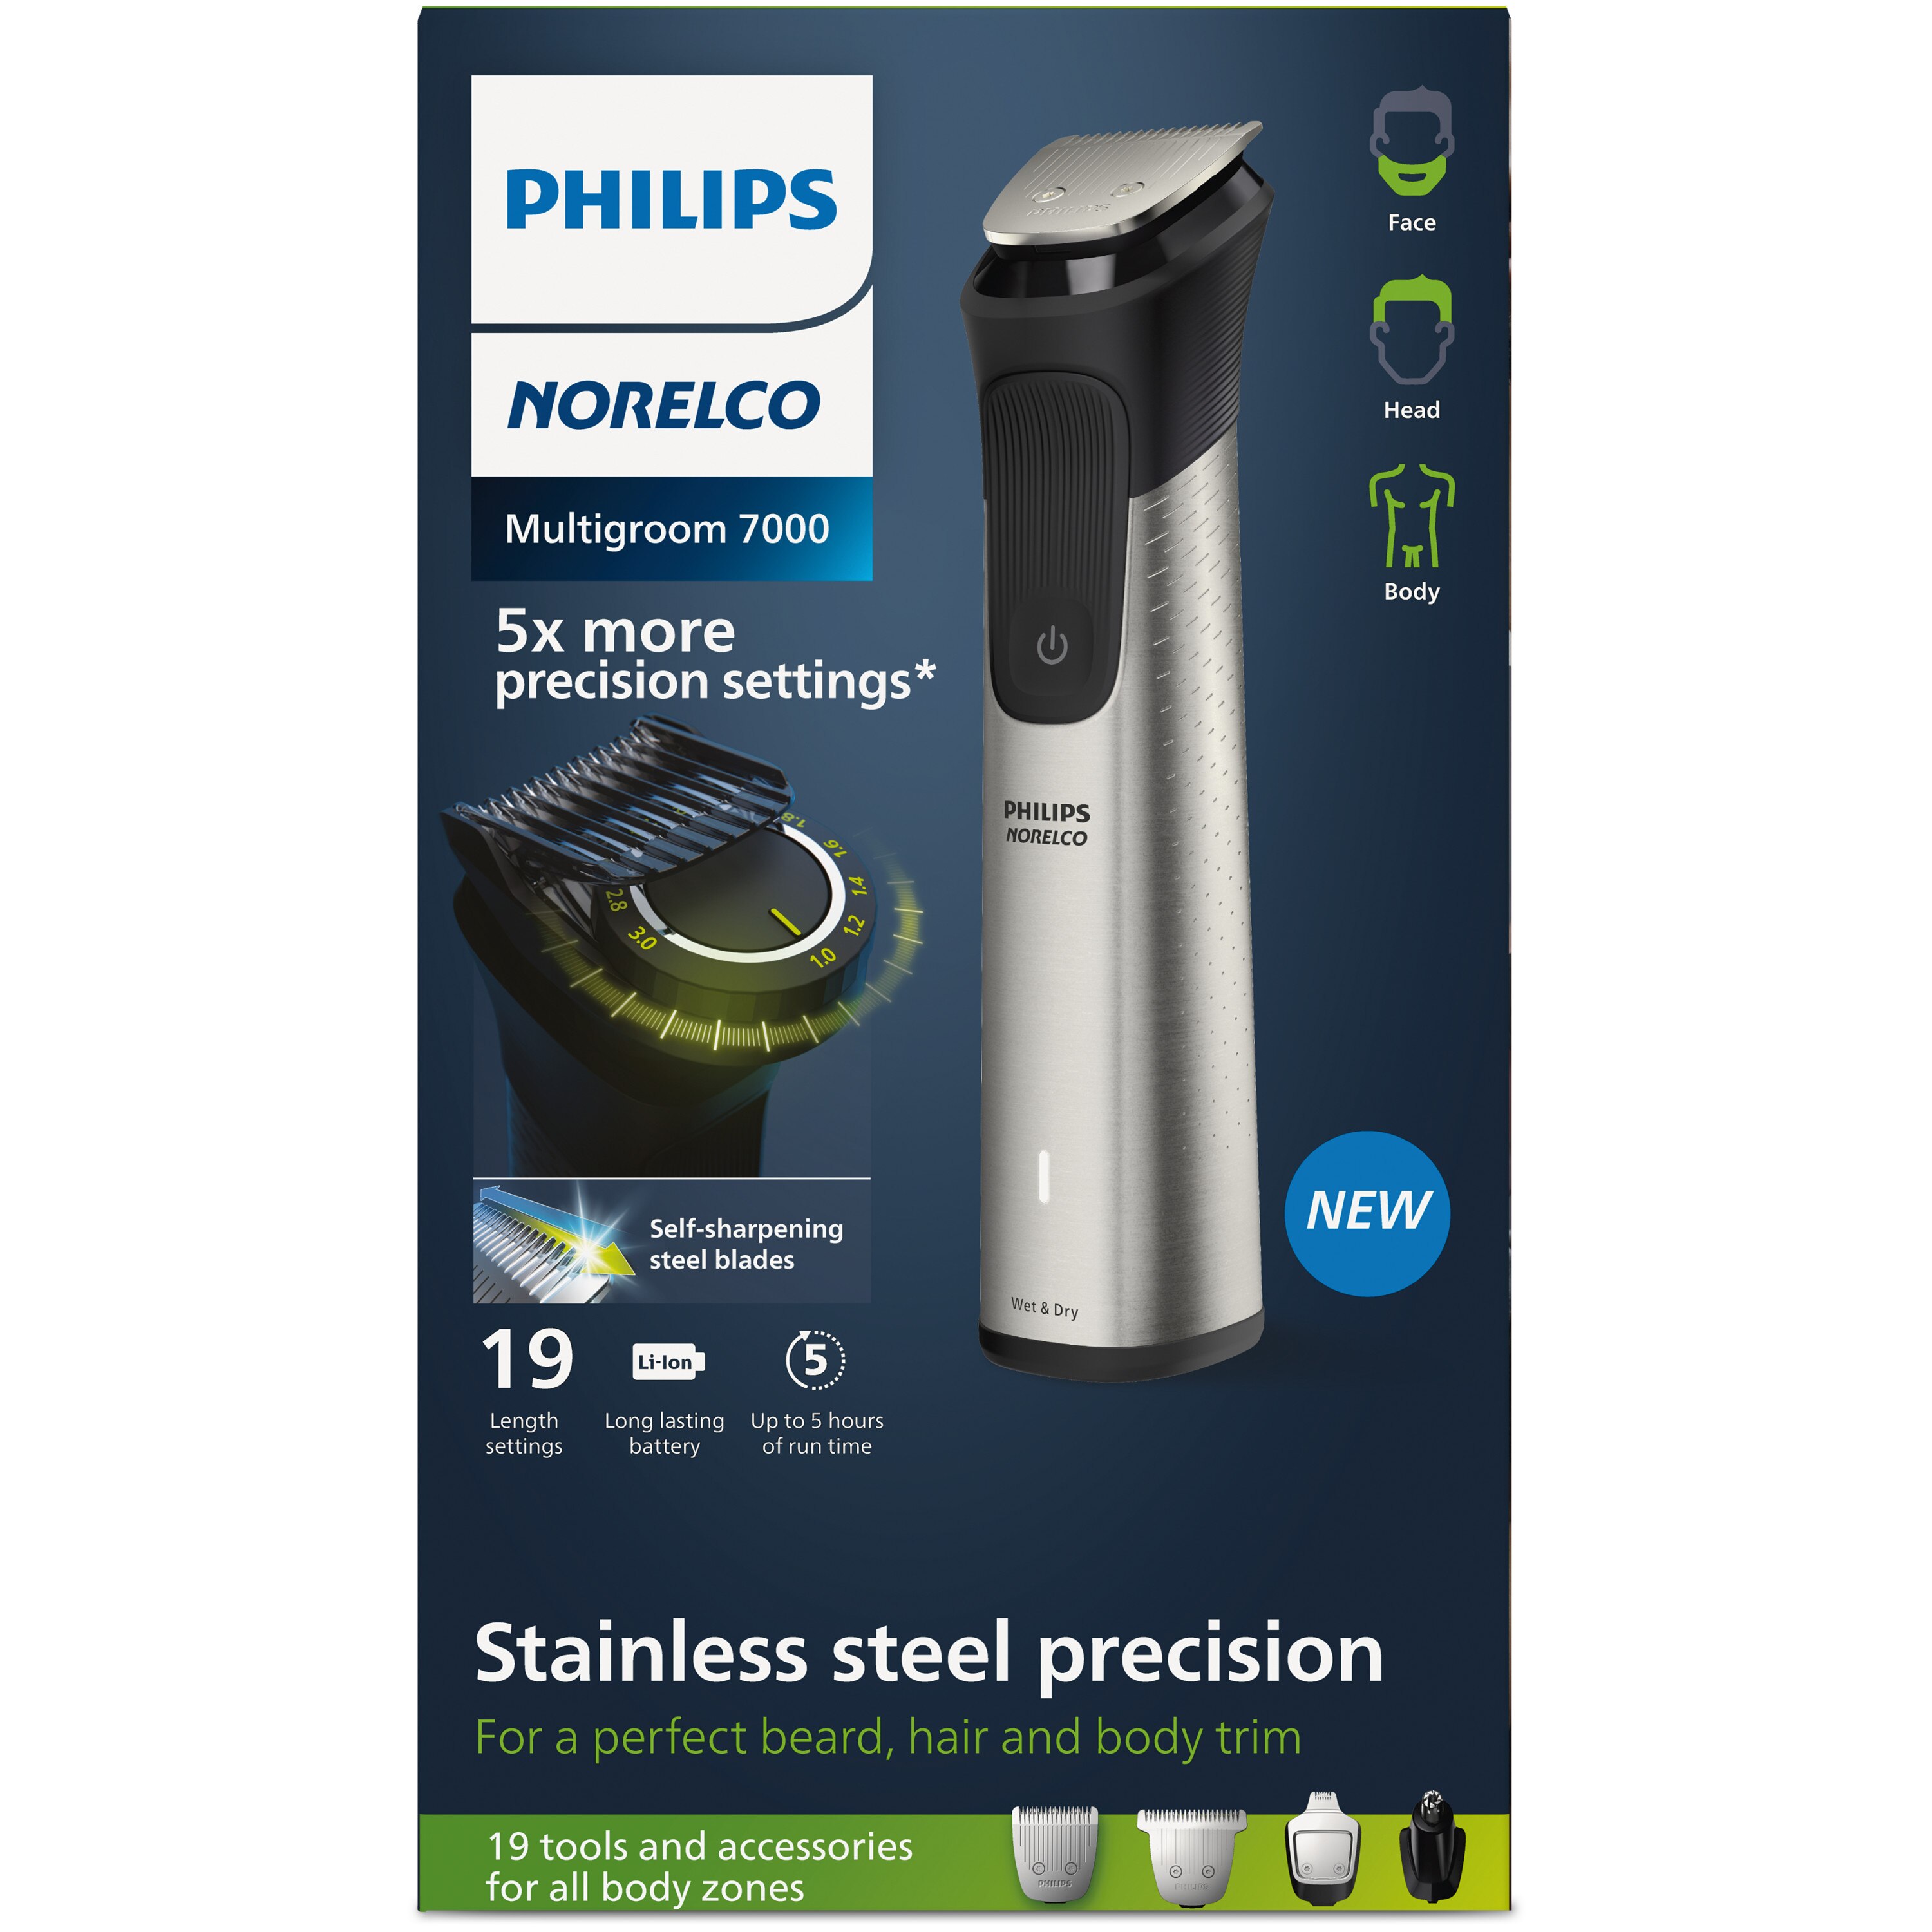 Migration Bone I need Philips Norelco Multigroom Series 7000, 23 Piece Mens Grooming Kit Face,  Head and Body | Pick Up In Store TODAY at CVS